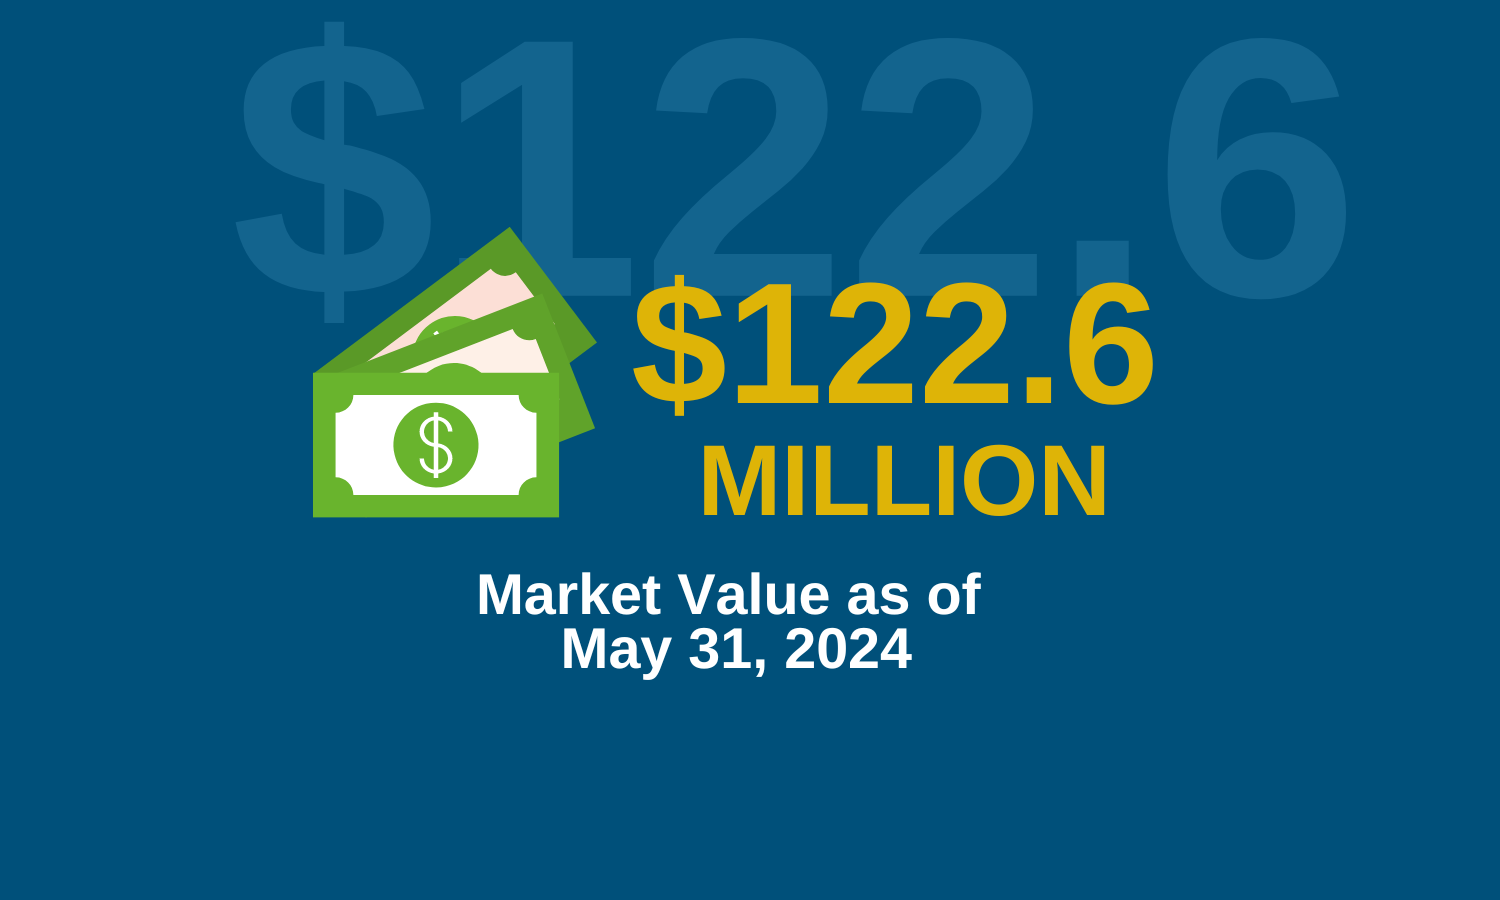 Graphic describing the market value at $122.6 million dollars as of May 31, 2024.